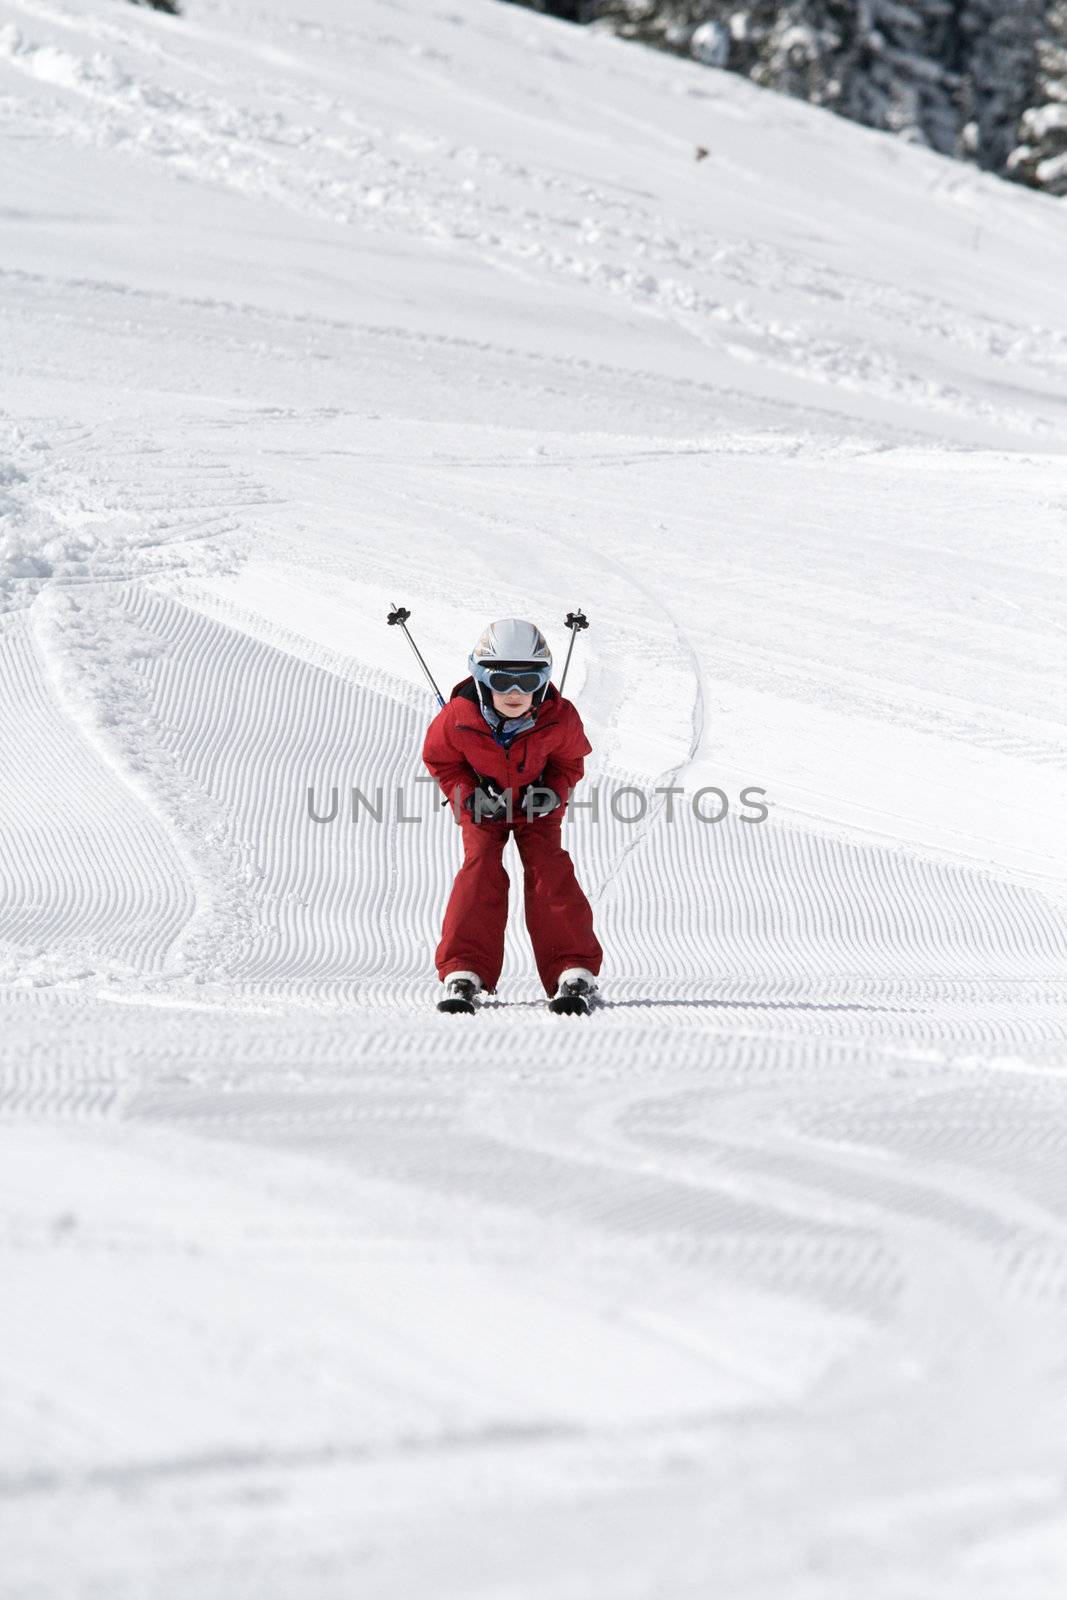 Young boy skiing down a slope, ski poles tucked under his arms